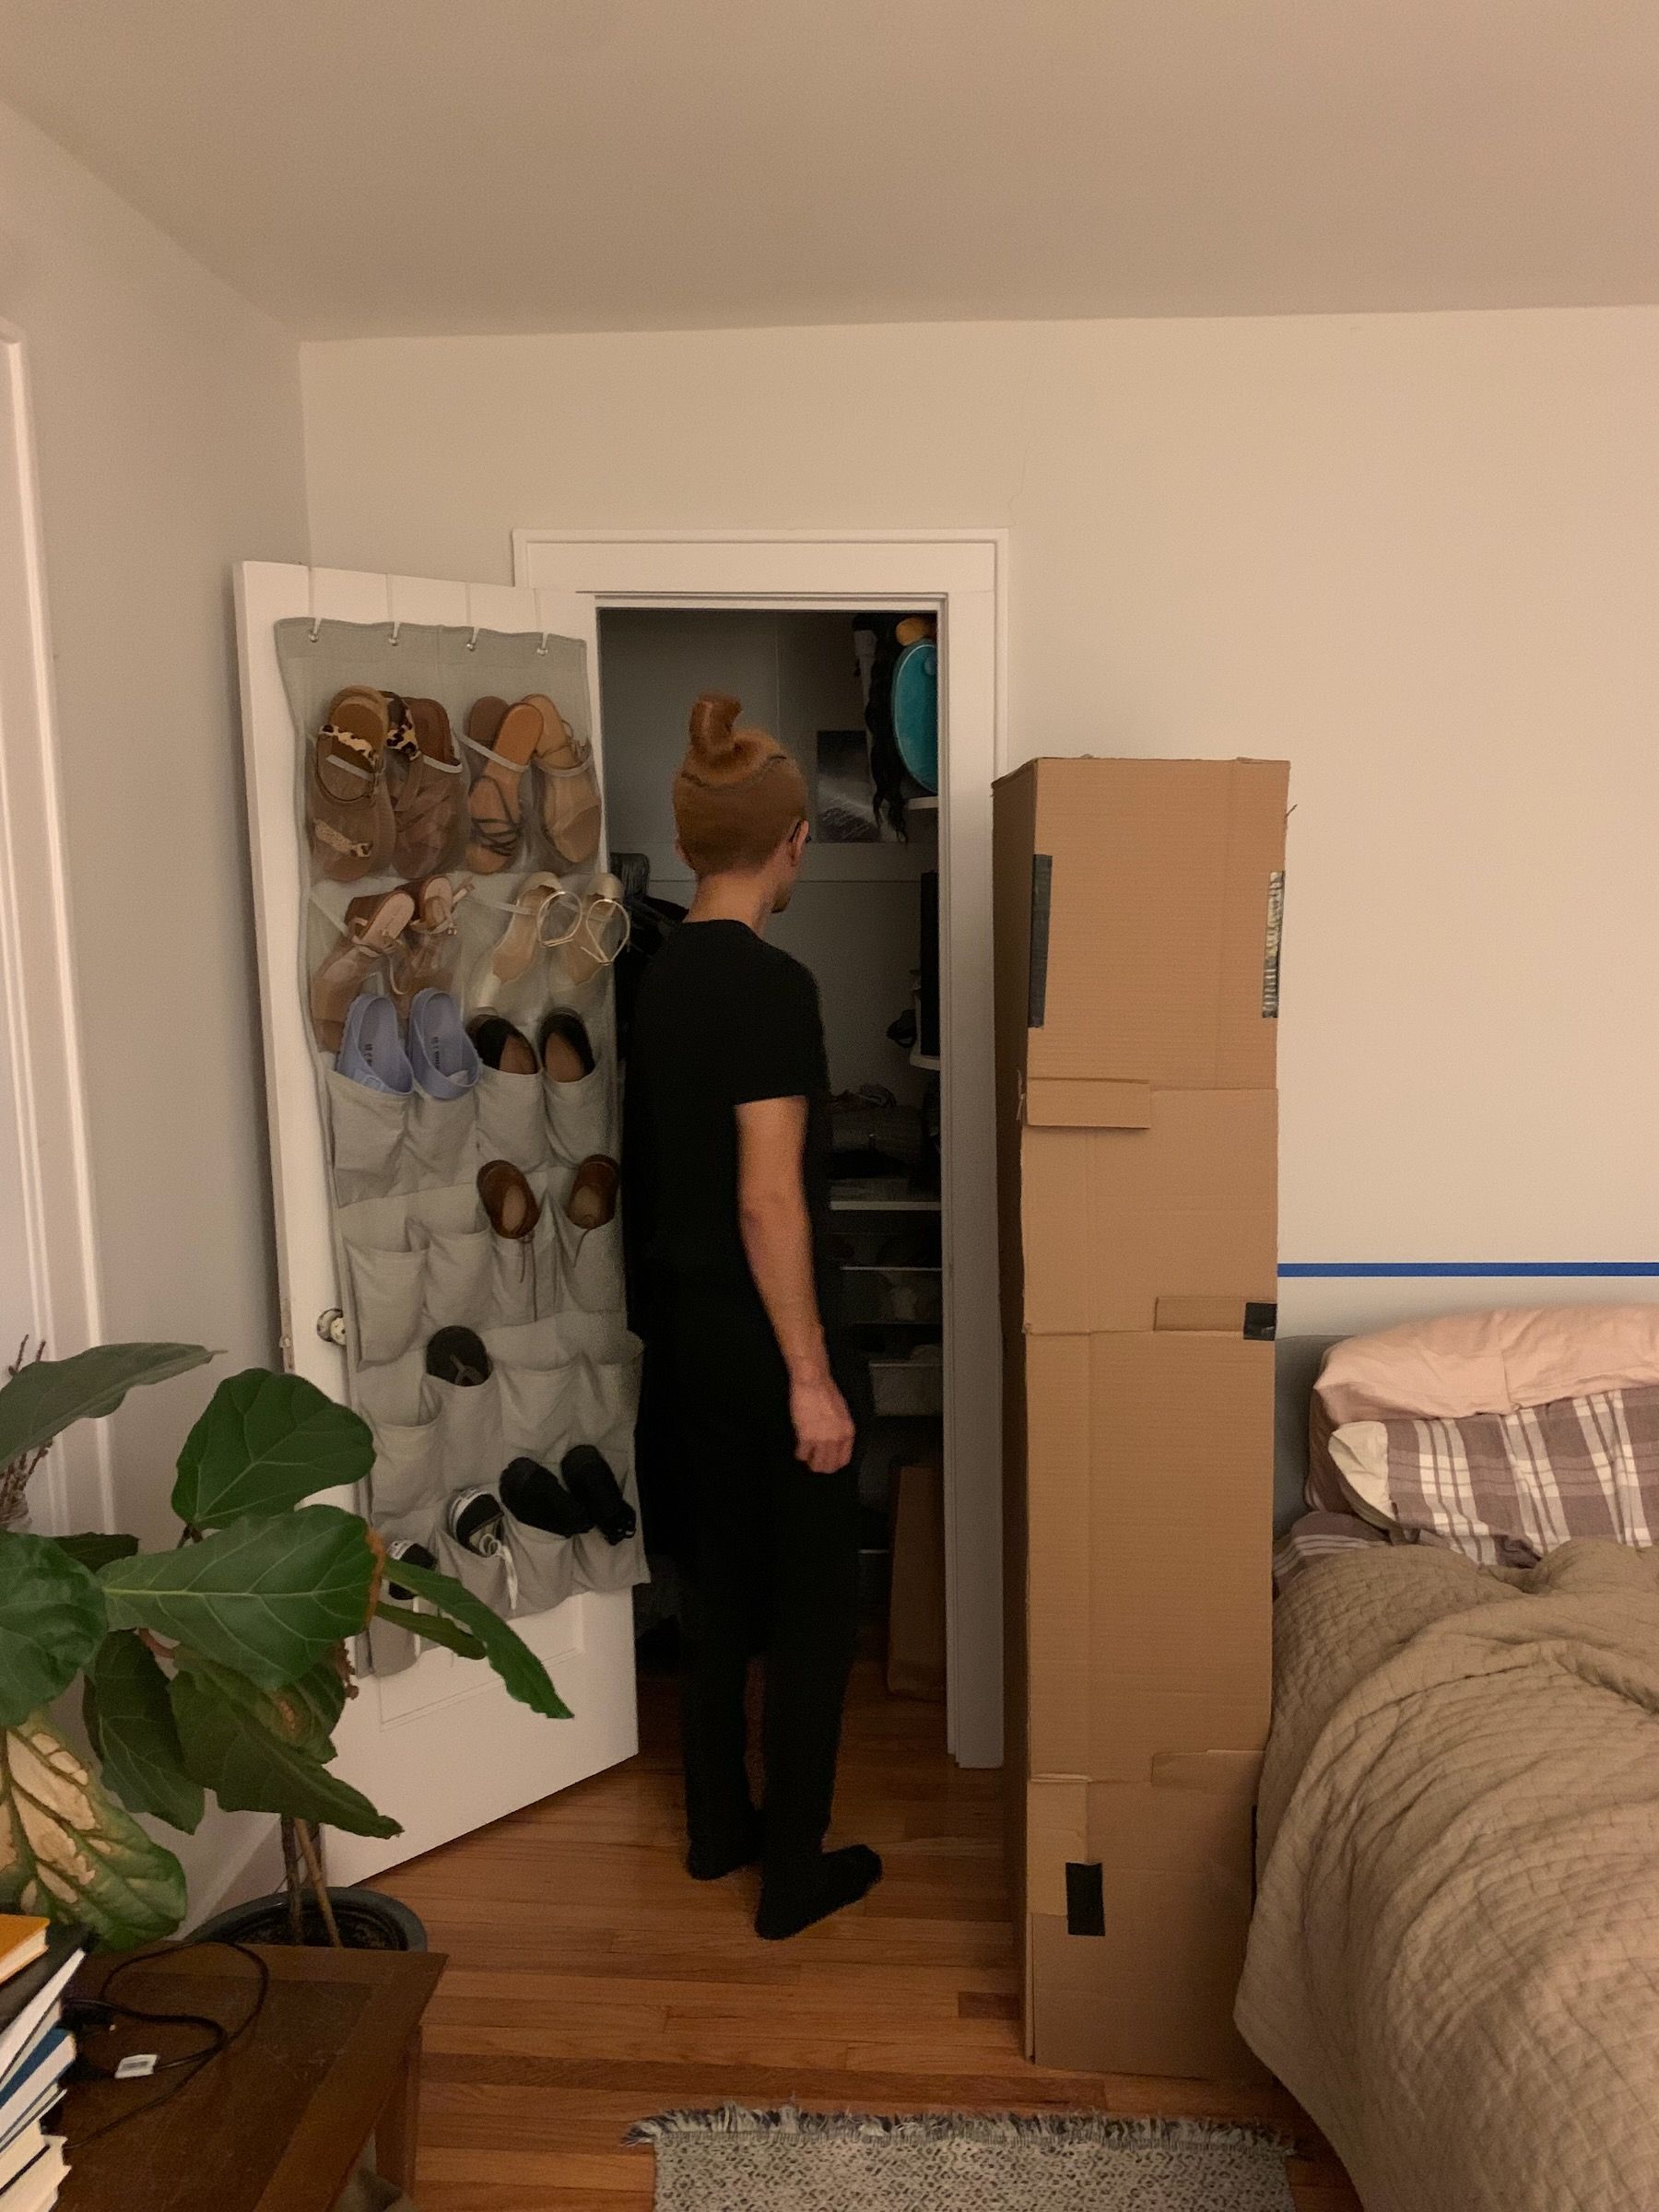 Me standing, back to camera, looking into closet. Open door to the left, pairs of shoes hanging from a over-the-door fabric hanger, cardboard cabinet volume to the right.